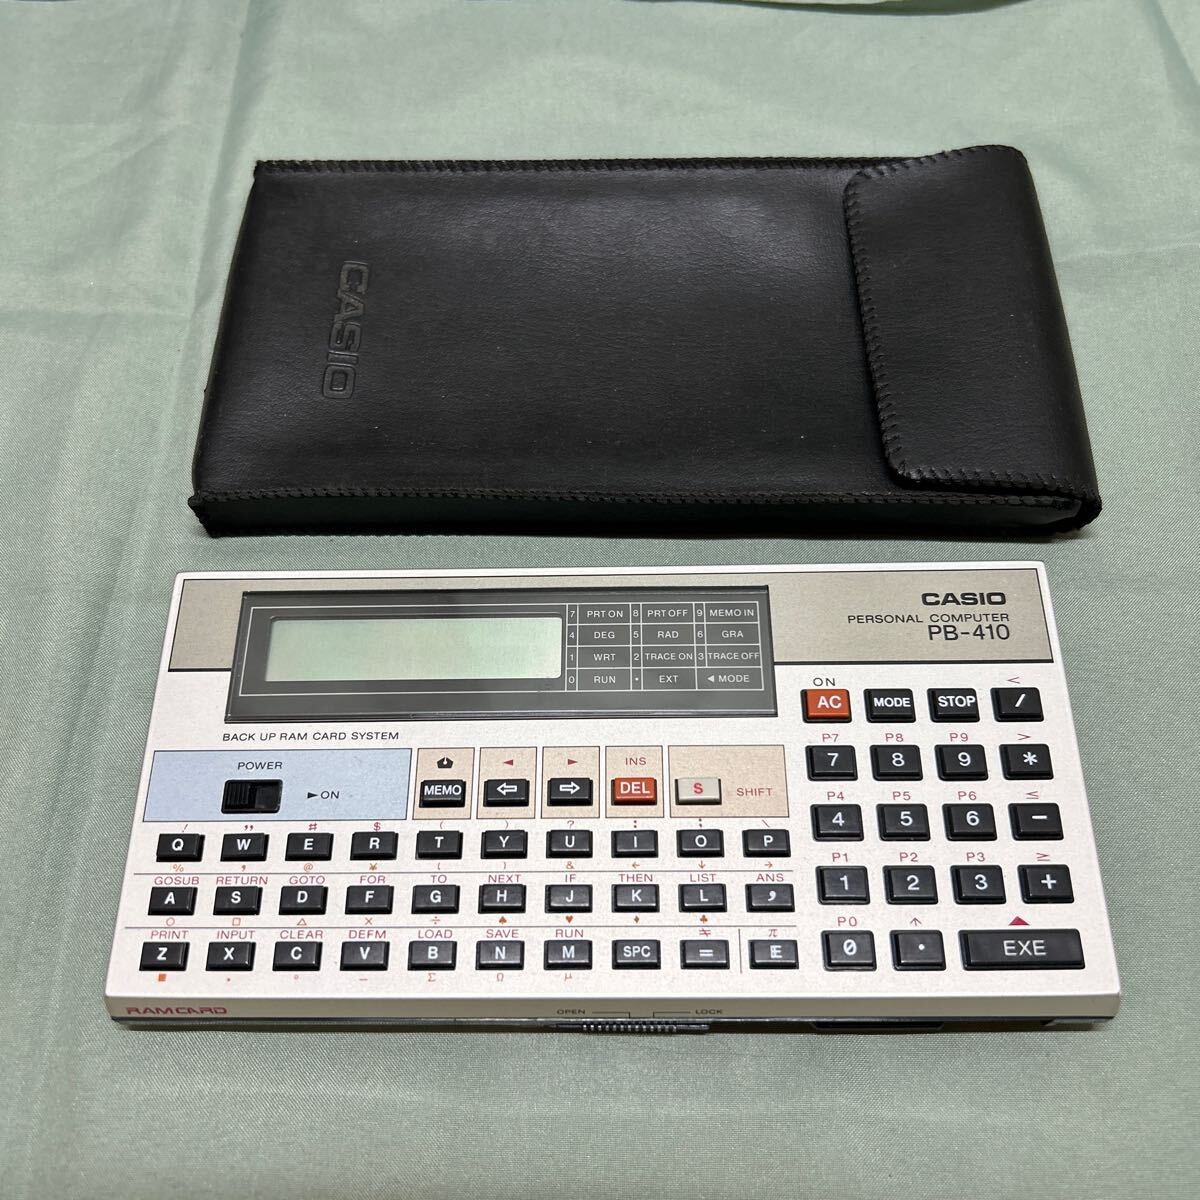 [3102.2 white shelves ] CASIO PERSONAL COMPUTER PB-410 pocket computer Casio pocket computer Showa Retro [ Junk present condition delivery 1 jpy start selling up 